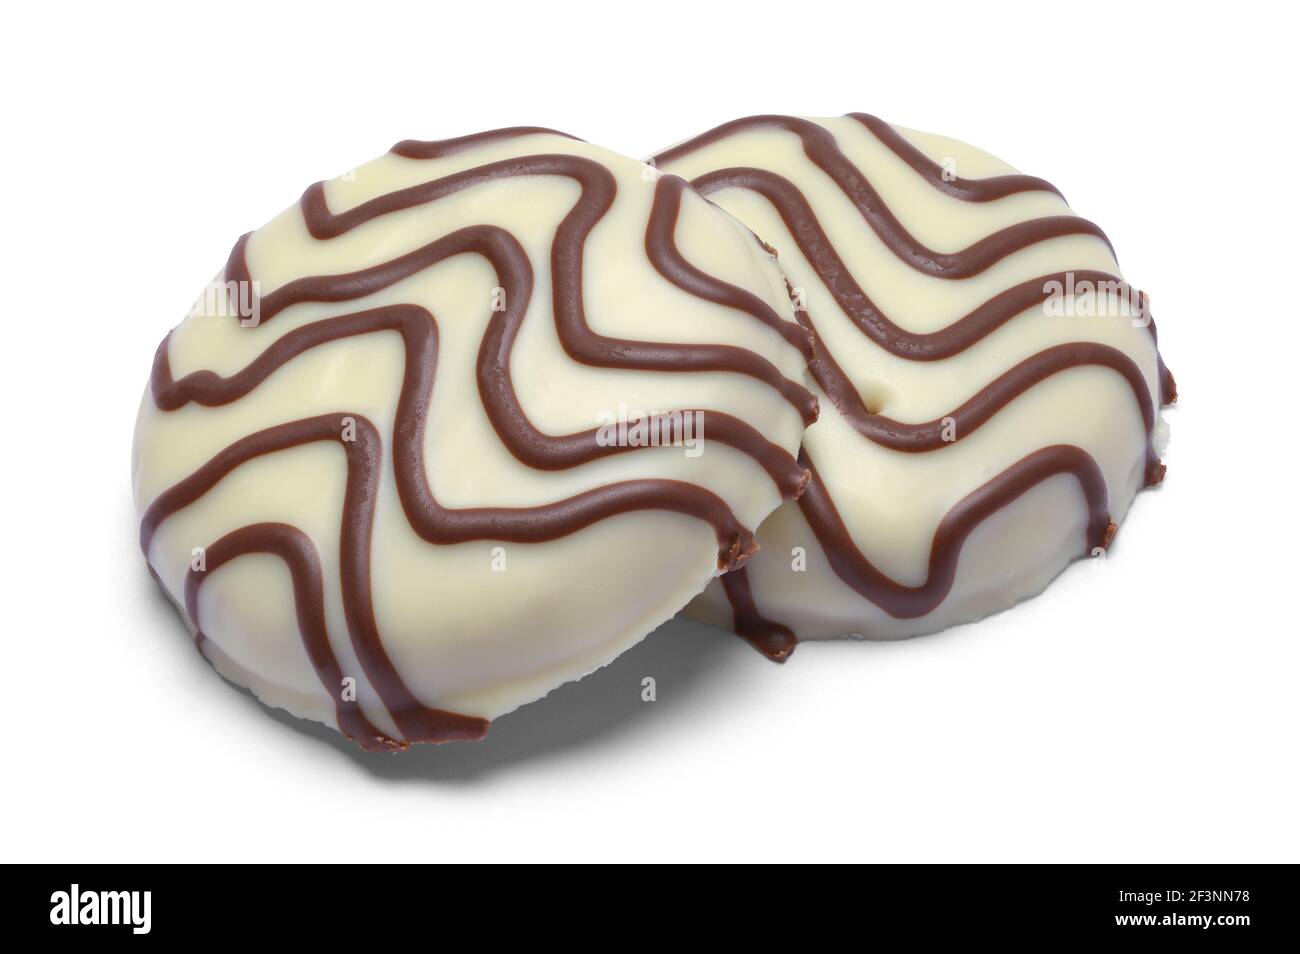 Two Chocolate Dipped Shortbread Cookies Cuot Out. Stock Photo